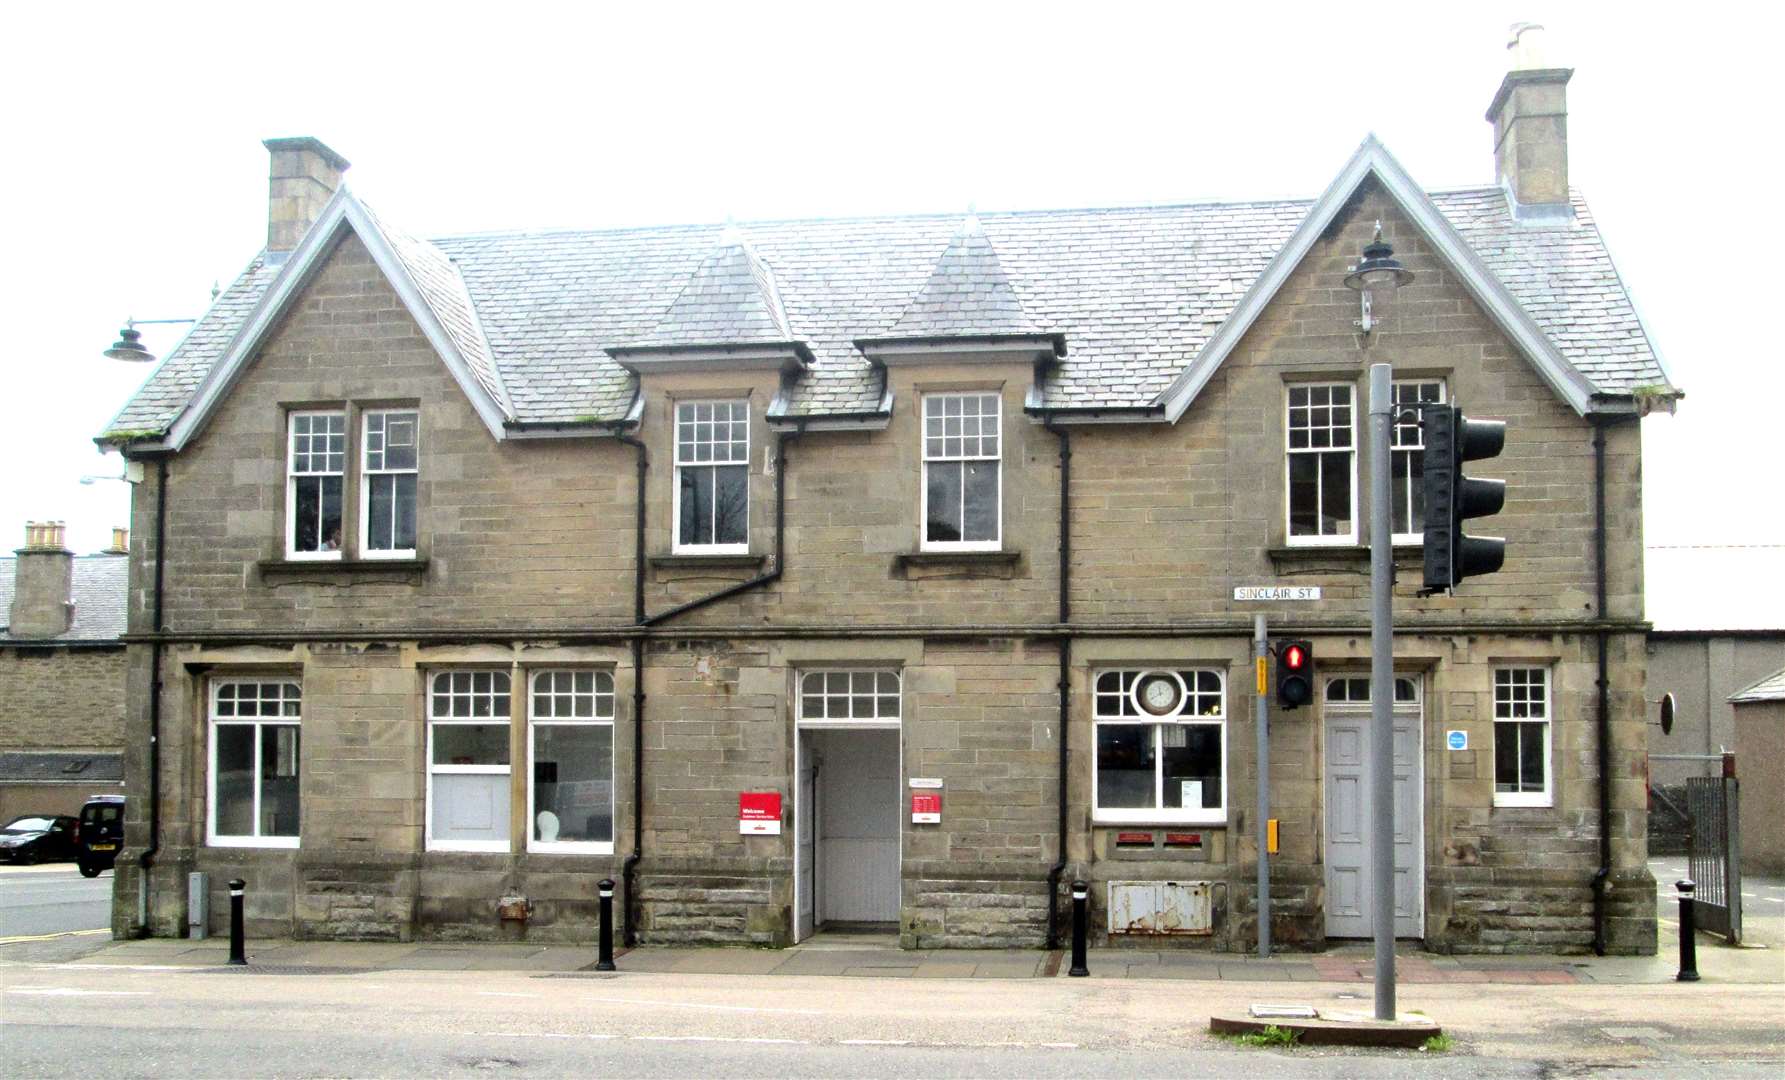 Thurso postal department where Joanne sent her art pieces from.